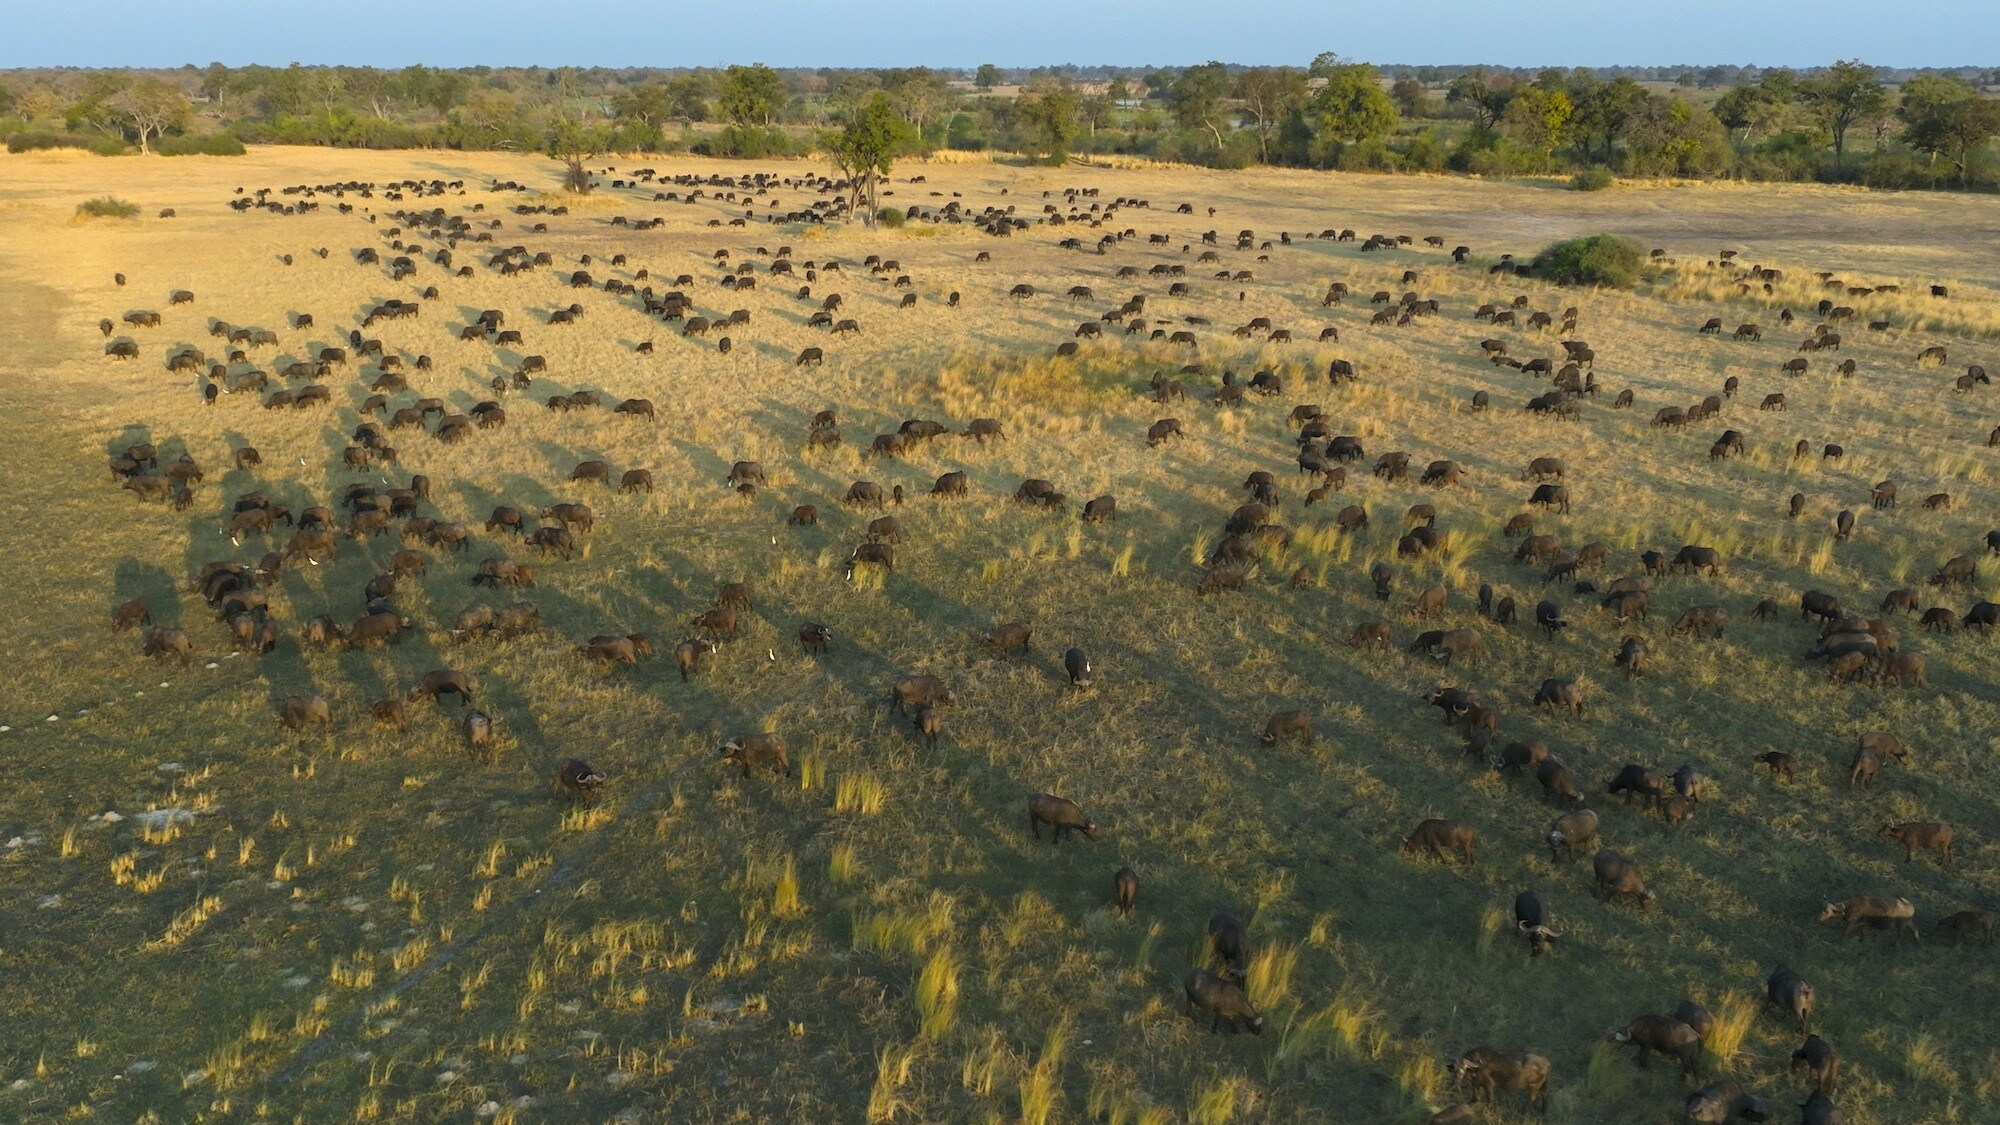 Cattle on the plains. (National Geographic for Disney+/Bertie Gregory)